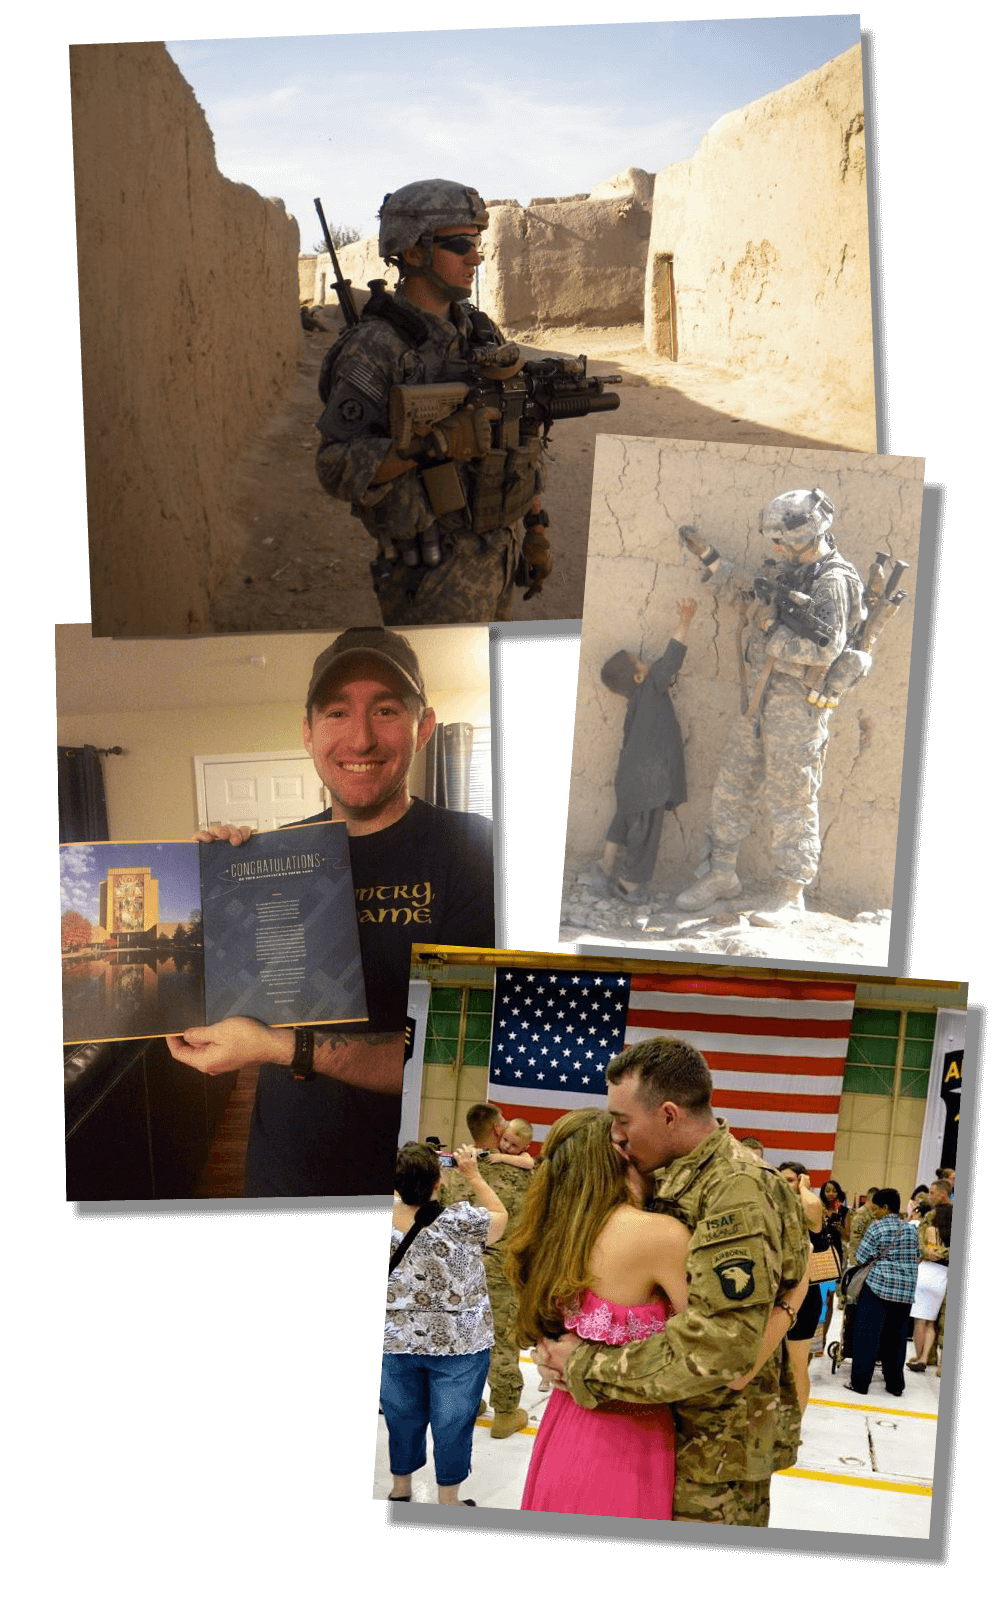 From top to bottom: Kevin Burke on foot patrol in Afghanistan. Burke giving an Afghan child a pen on a patrol. Burke receiving his acceptance letter to Notre Dame. Burke greeting his wife after returning from Afghanistan in 2013.